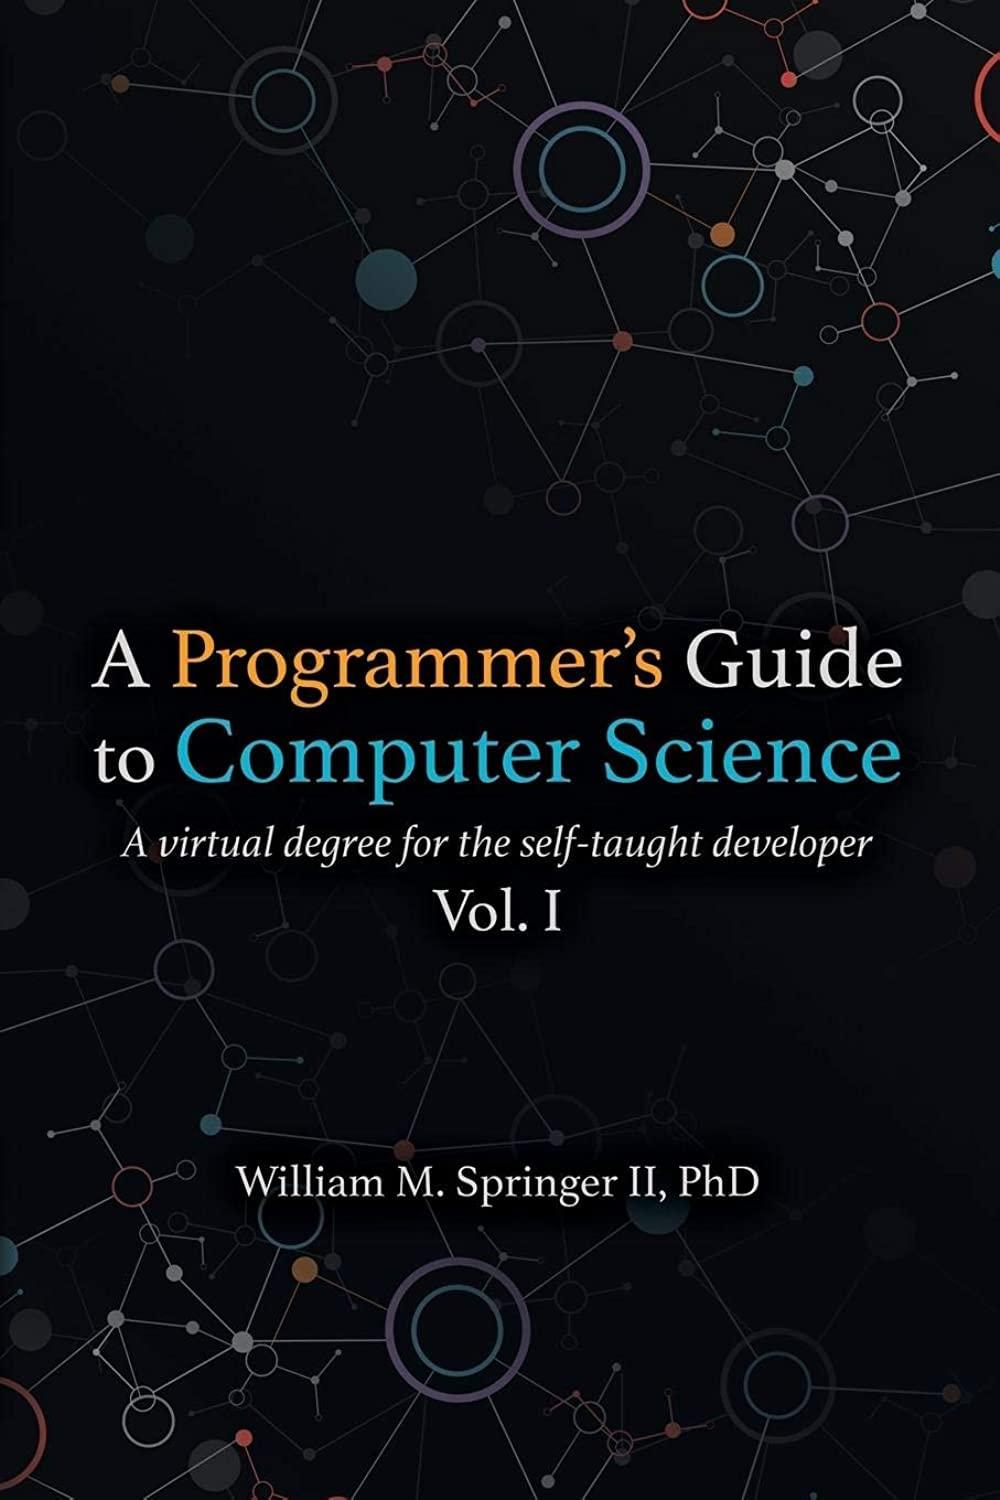 a programmer s guide to computer science a virtual degree for the self-taught developer volume 1 1st edition